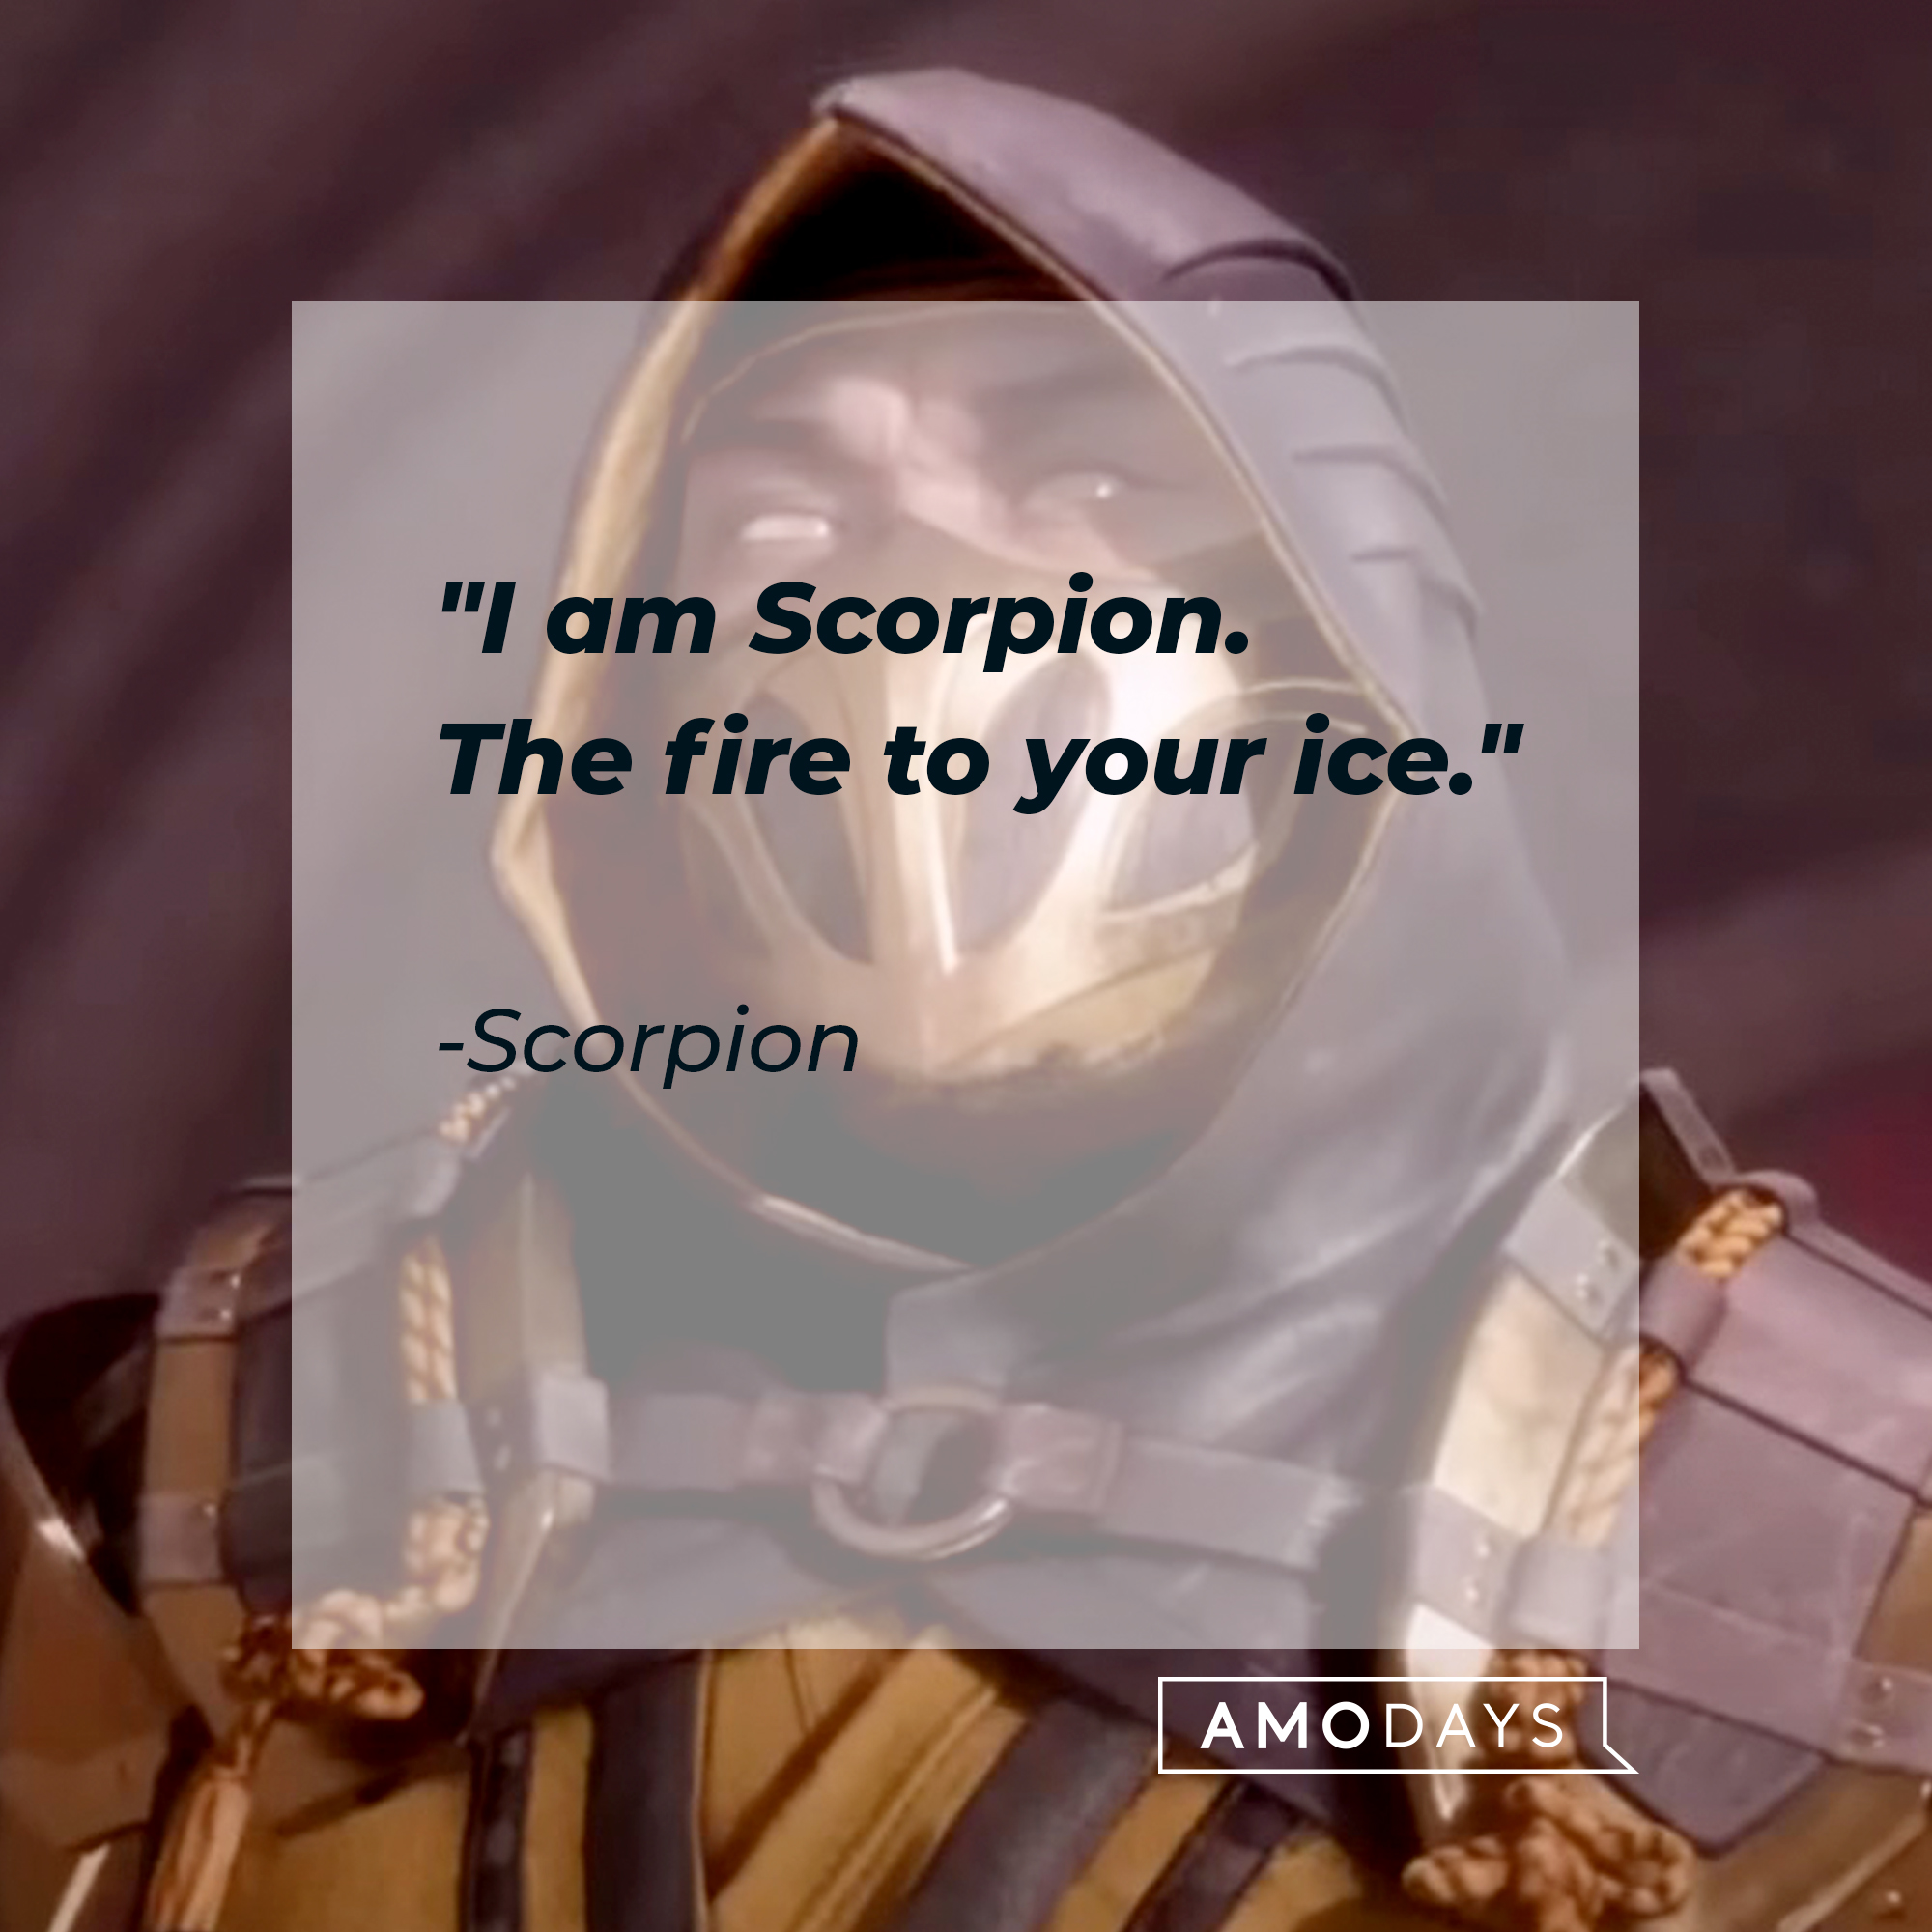 An image of Scorpion with his quote: "I am Scorpion. The fire to your ice." |Source: facebook.com/MortalKombatUK